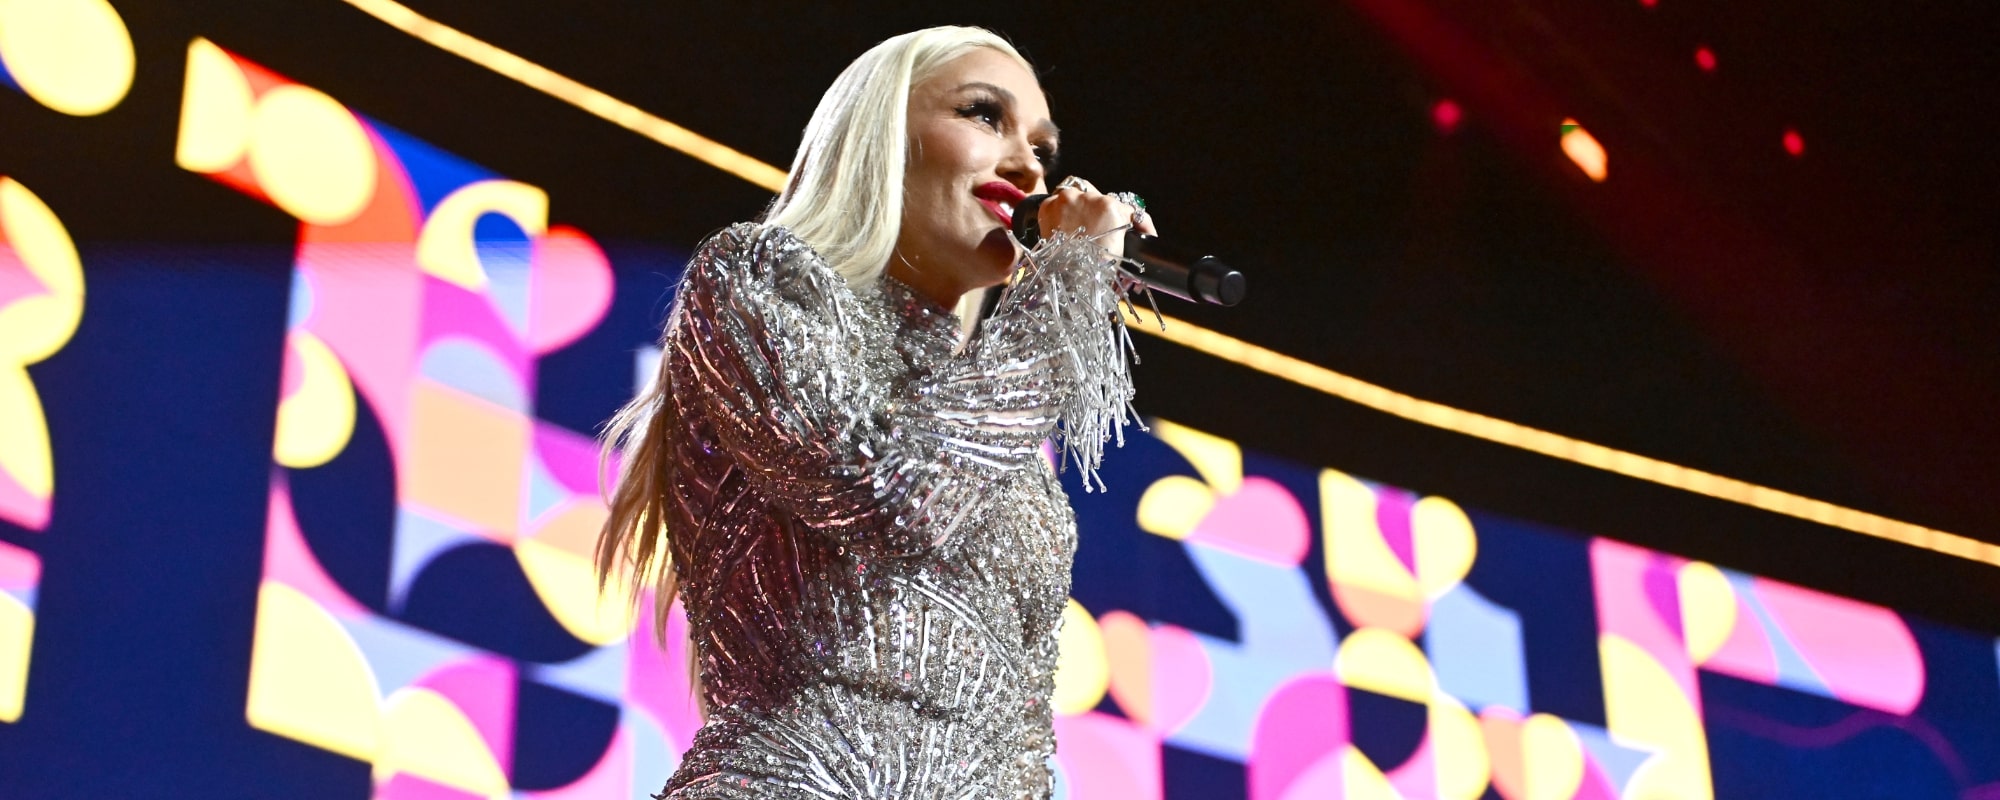 ‘The Voice’ Fans React to Season 26 Coaches Lineup Featuring Gwen Stefani, Snoop Dogg, and More